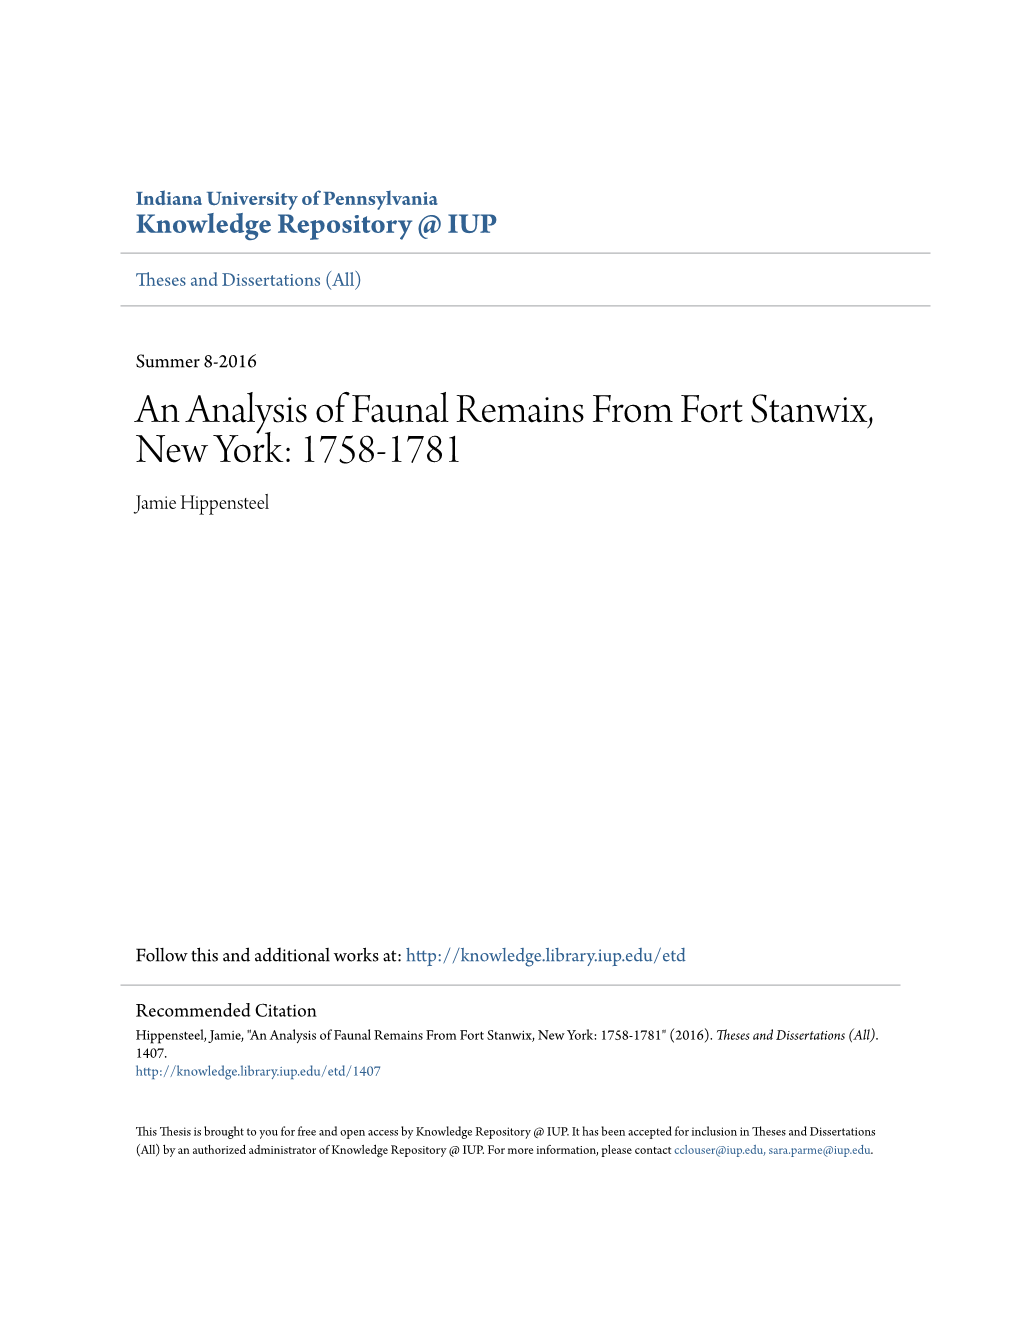 An Analysis of Faunal Remains from Fort Stanwix, New York: 1758-1781 Jamie Hippensteel